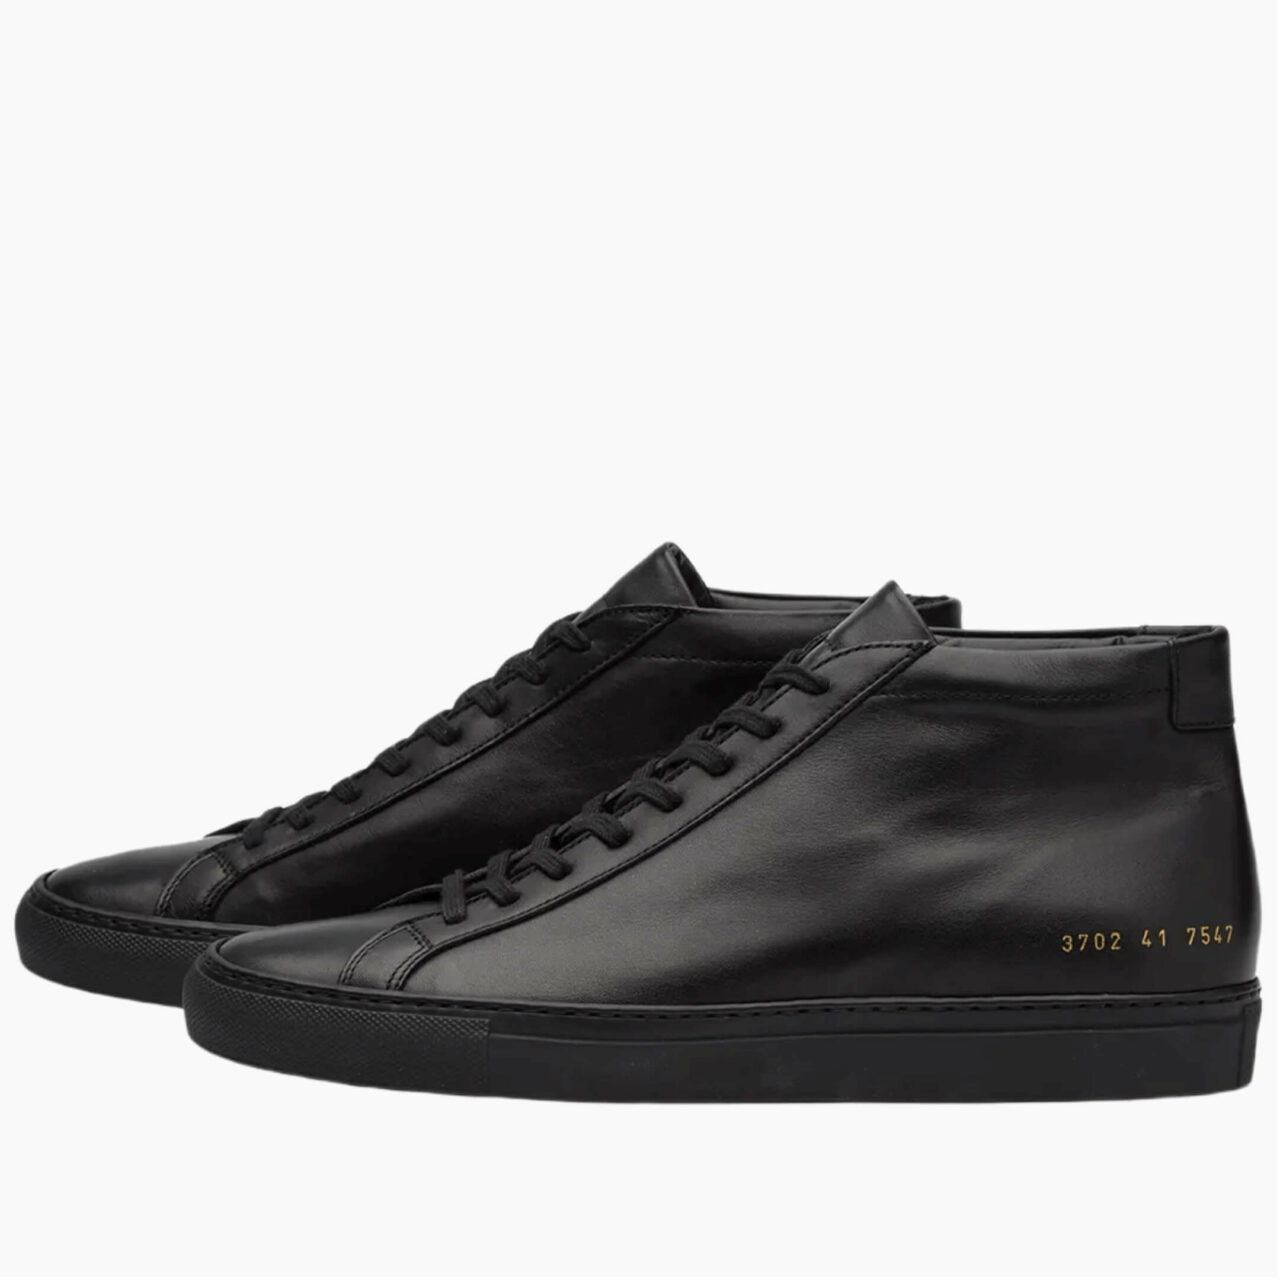 Common Projects Women's Original Achilles Leather Mid-Top Sneakers